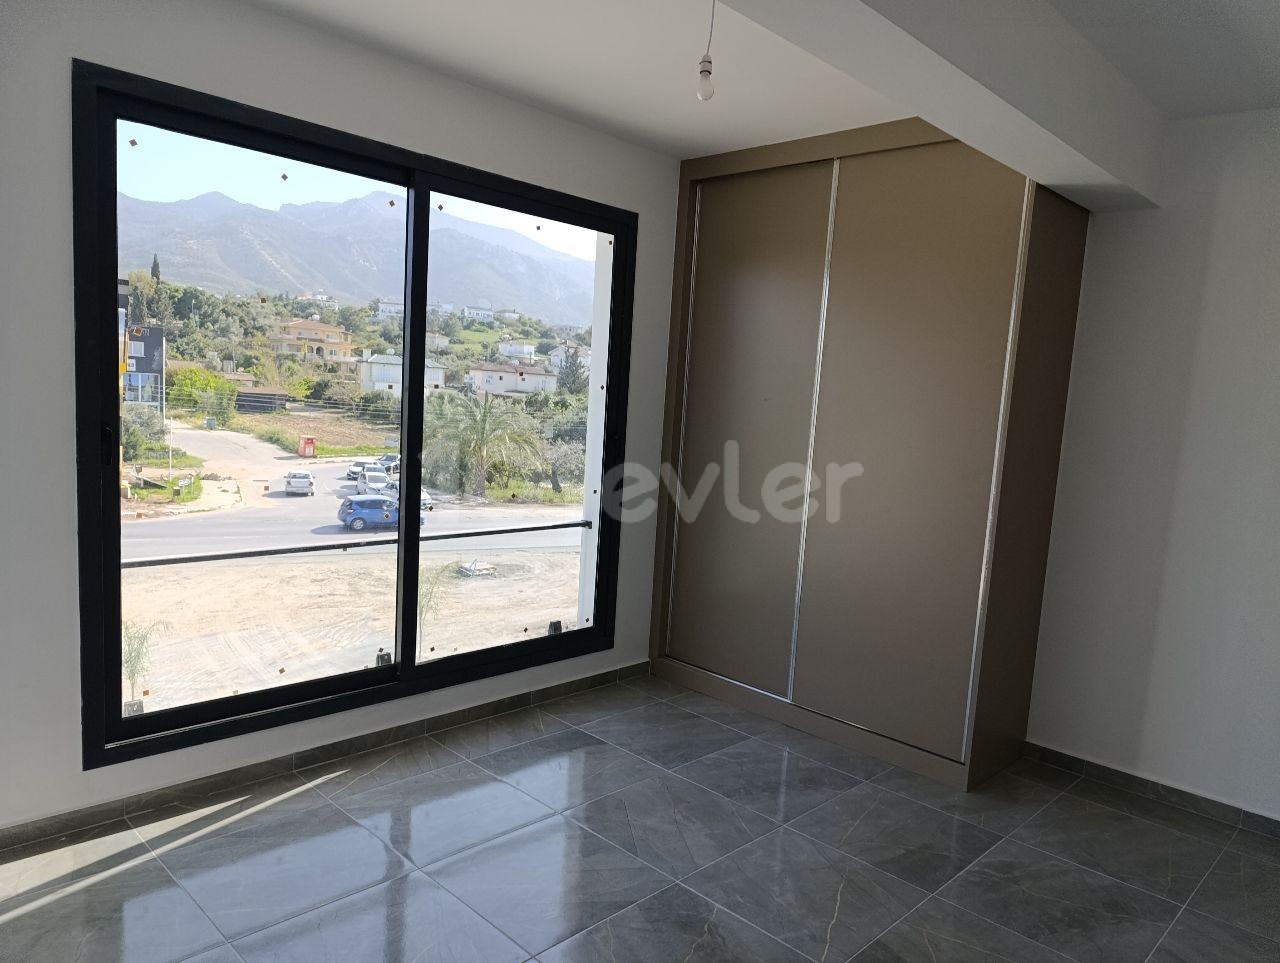 2+1 flat for rent with commercial permit on the main road in Kyrenia Çatalköy.